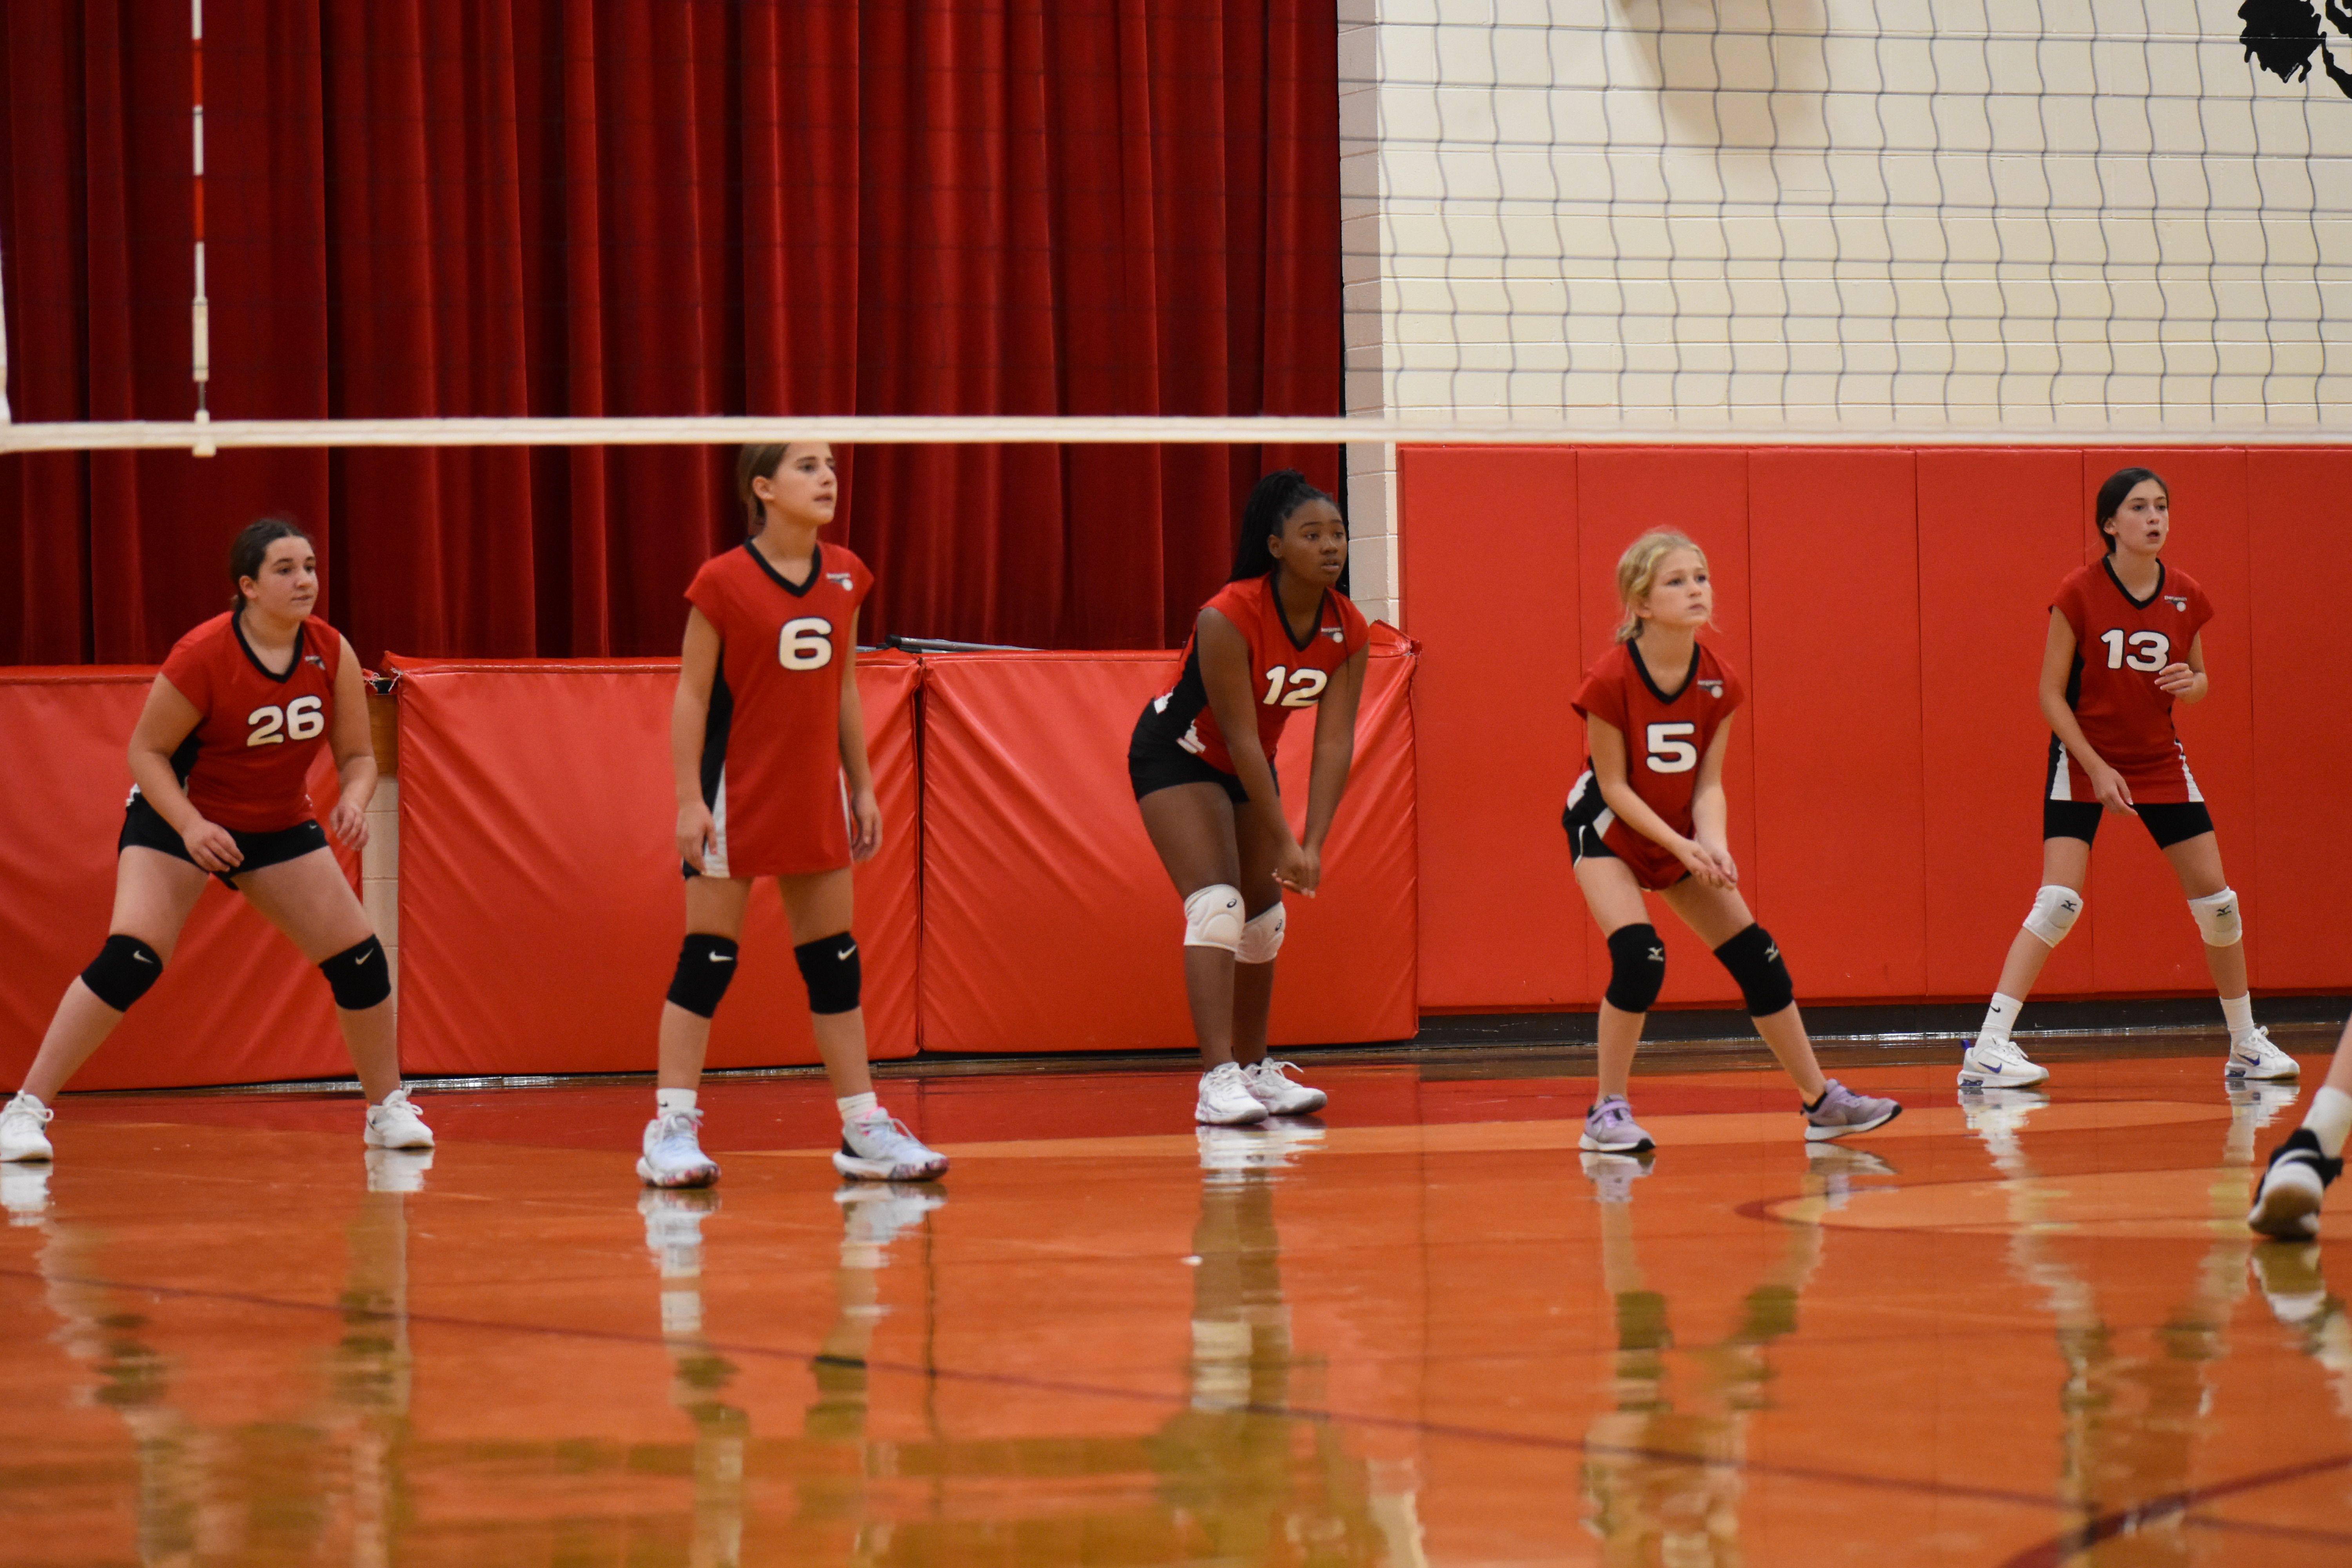 5 Benjamin JV volleyball players stand ready for the serve during a game.